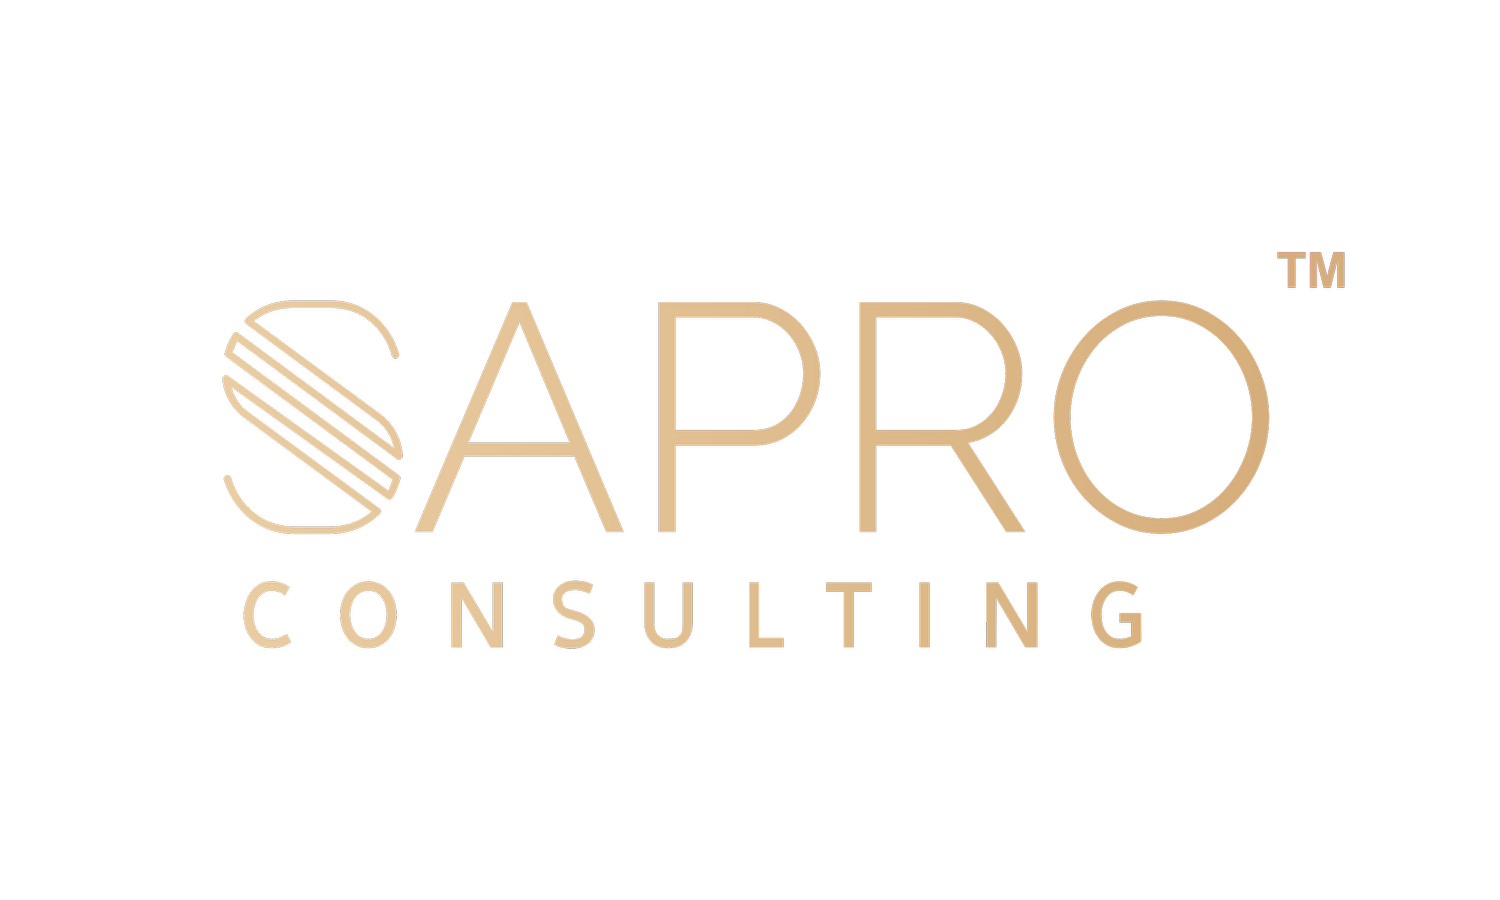 SAPRO CONSULTING - YOUR TRIAL PATHWAY PARTNER